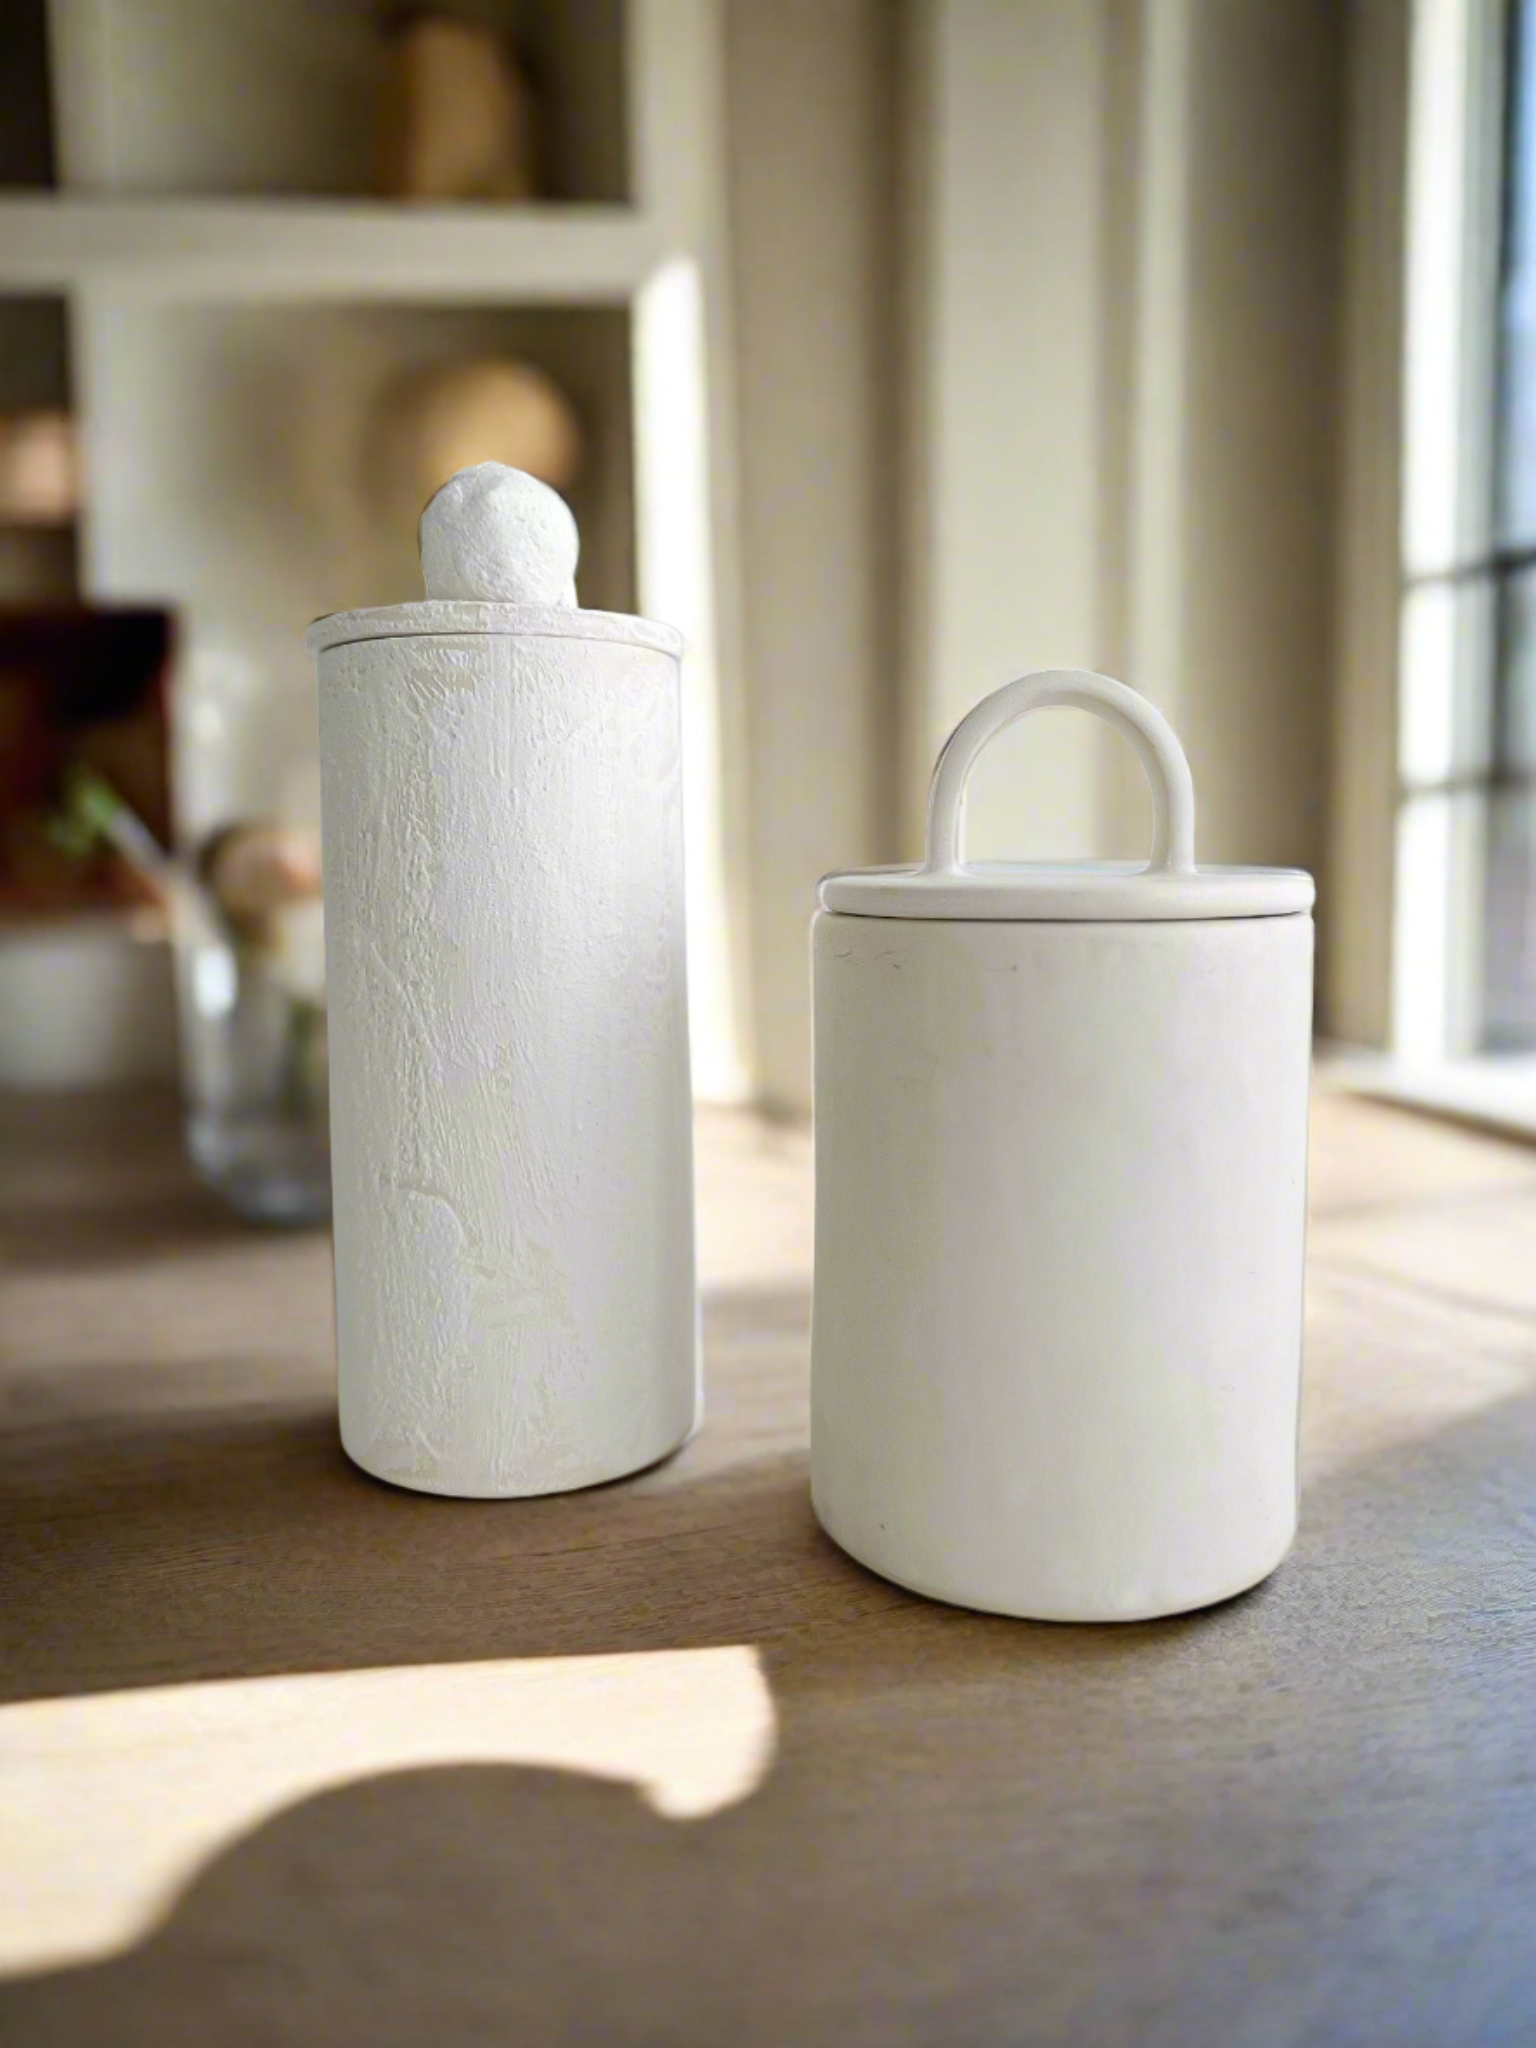 Handmade ceramic staggered storage canisters in various sizes and colors